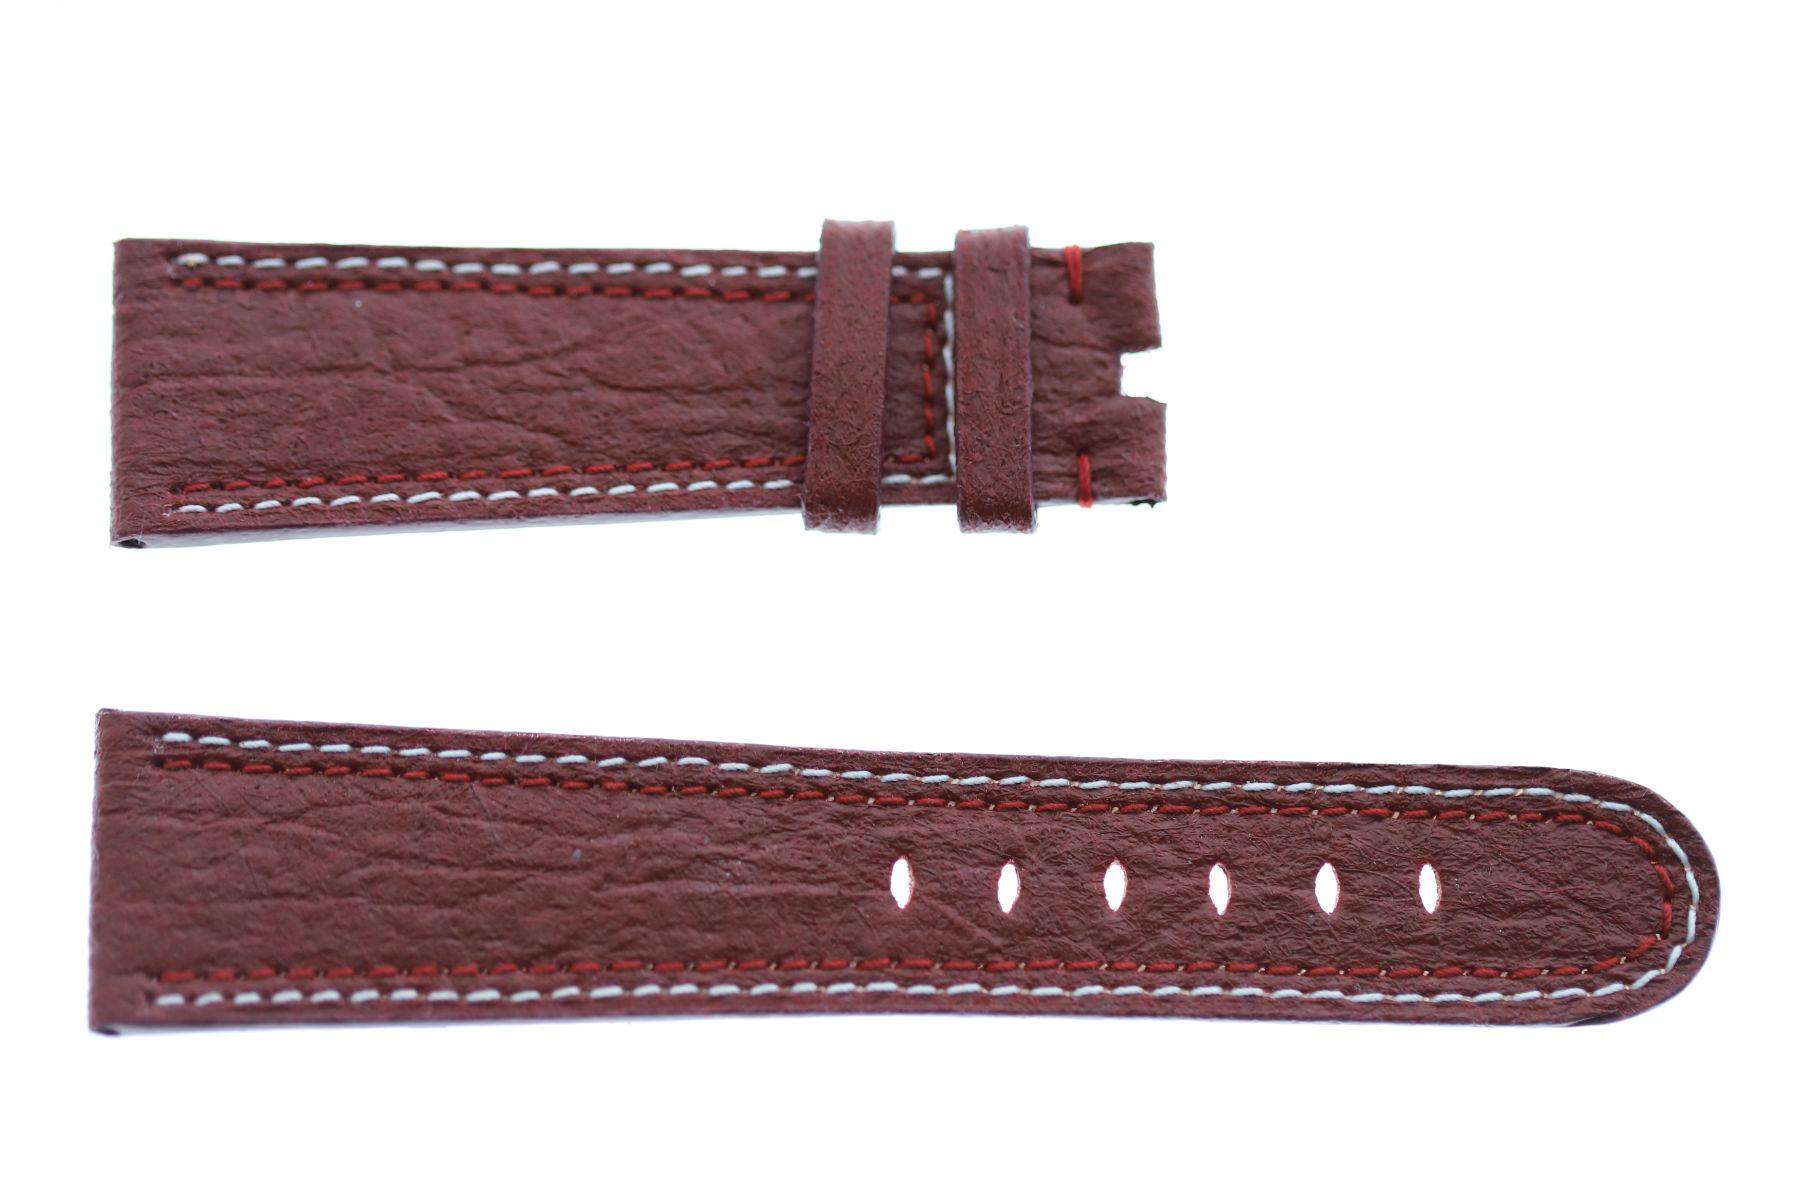 Mulberry Bordeaux Pinatex Strap General style